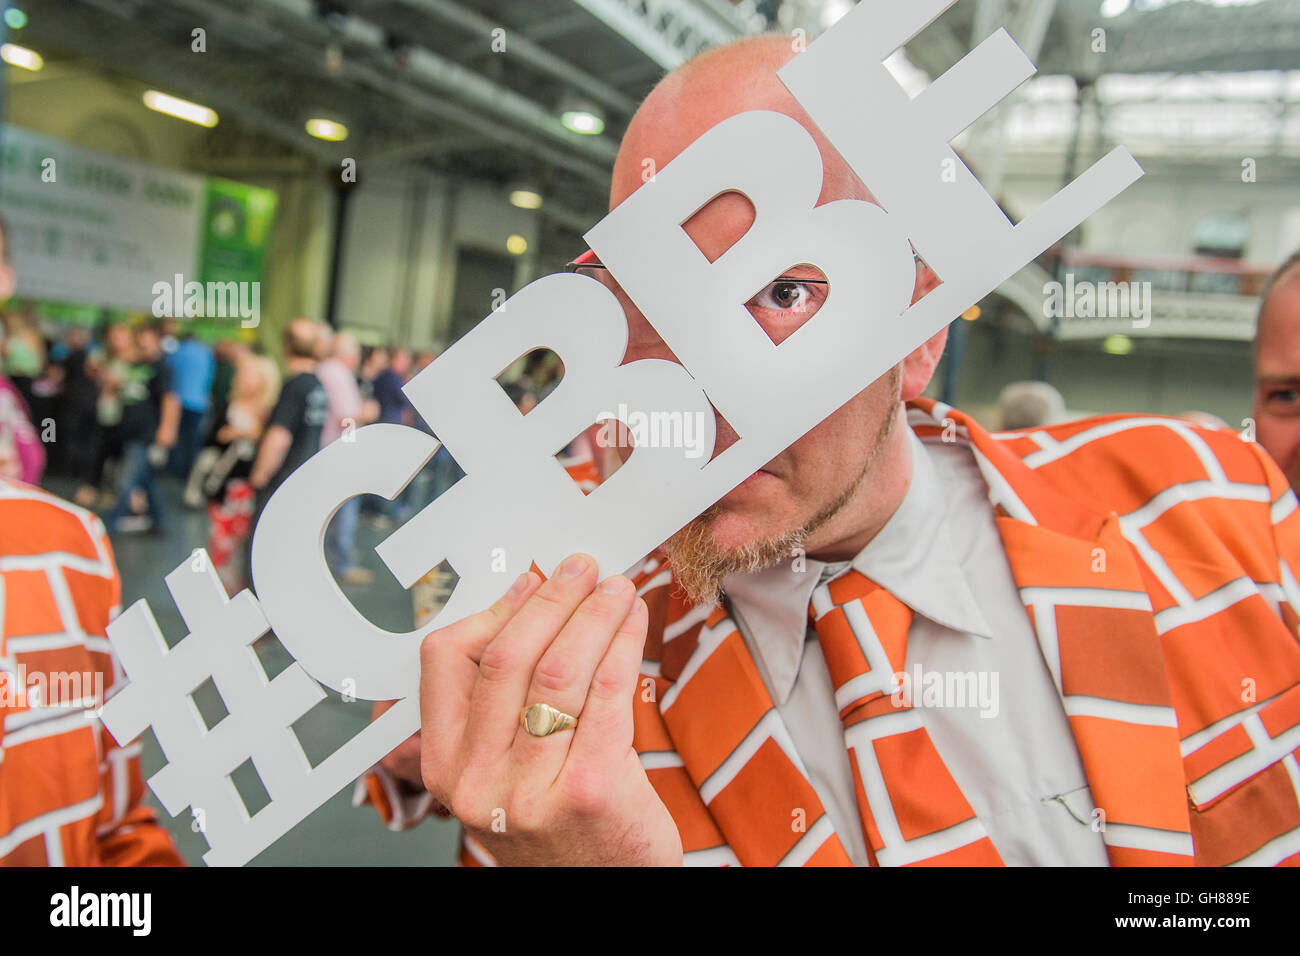 London, UK. 9th August, 2016. The Great British Beer Festival organised by the Campaign for Real Ale (CAMRA) offers visitors over 900 real ales, ciders, perries and international beers at Olympia. Credit:  Guy Bell/Alamy Live News Stock Photo